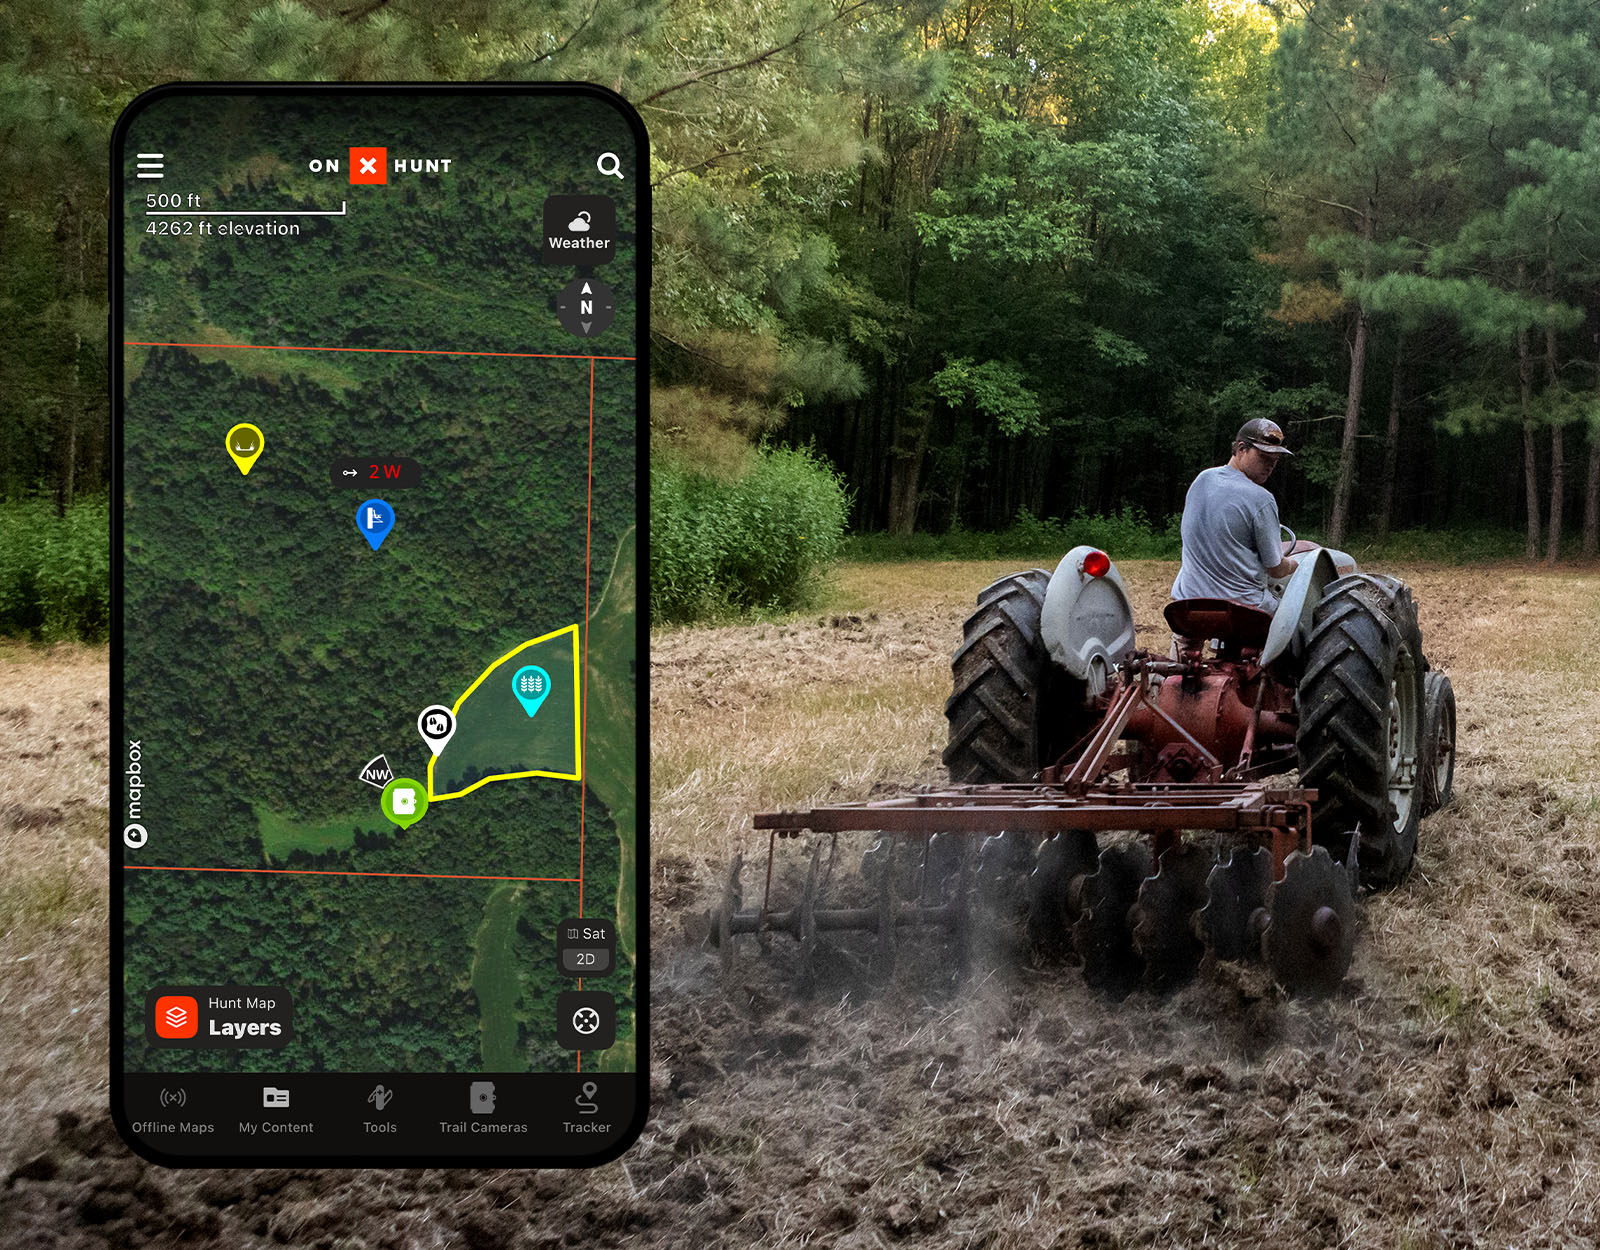 A hunter uses a tractor to rough up the soil for a food plot. The onX Hunt App overlays the image.